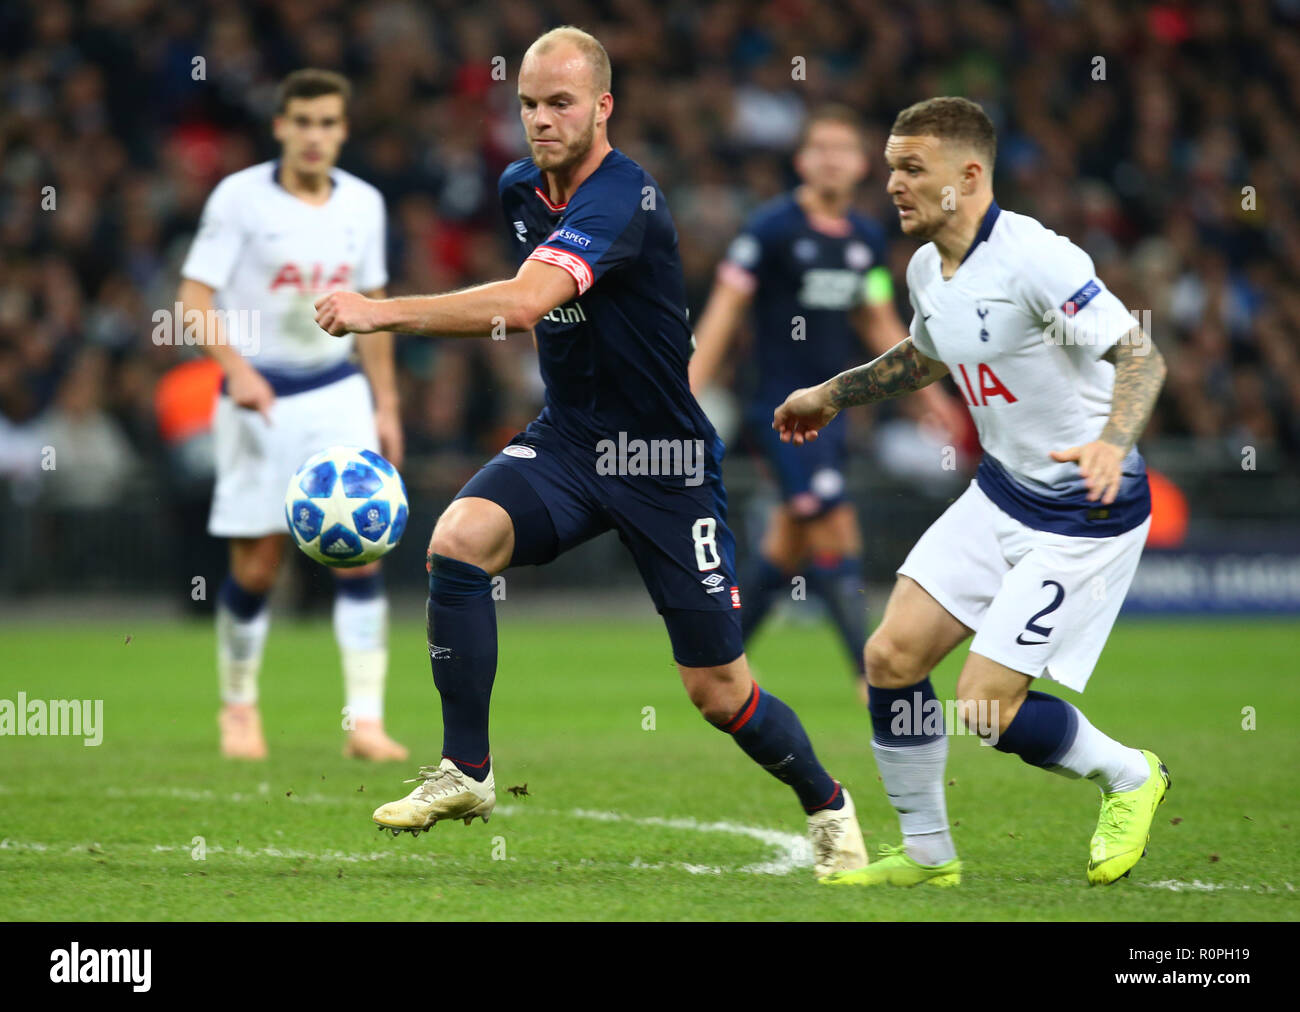 London, England, 06th November 2018.  Jorrit Hendrix of PSV Eindhoven during Champion League Group B between Tottenham Hotspur and PSV Eindhoven at Wembley stadium , London, England on 06 Nov 2018. Credit Action Foto Sport  FA Premier League and Football League images are subject to DataCo Licence. Editorial use ONLY. No print sales. No personal use sales. NO UNPAID USE Credit: Action Foto Sport/Alamy Live News Stock Photo